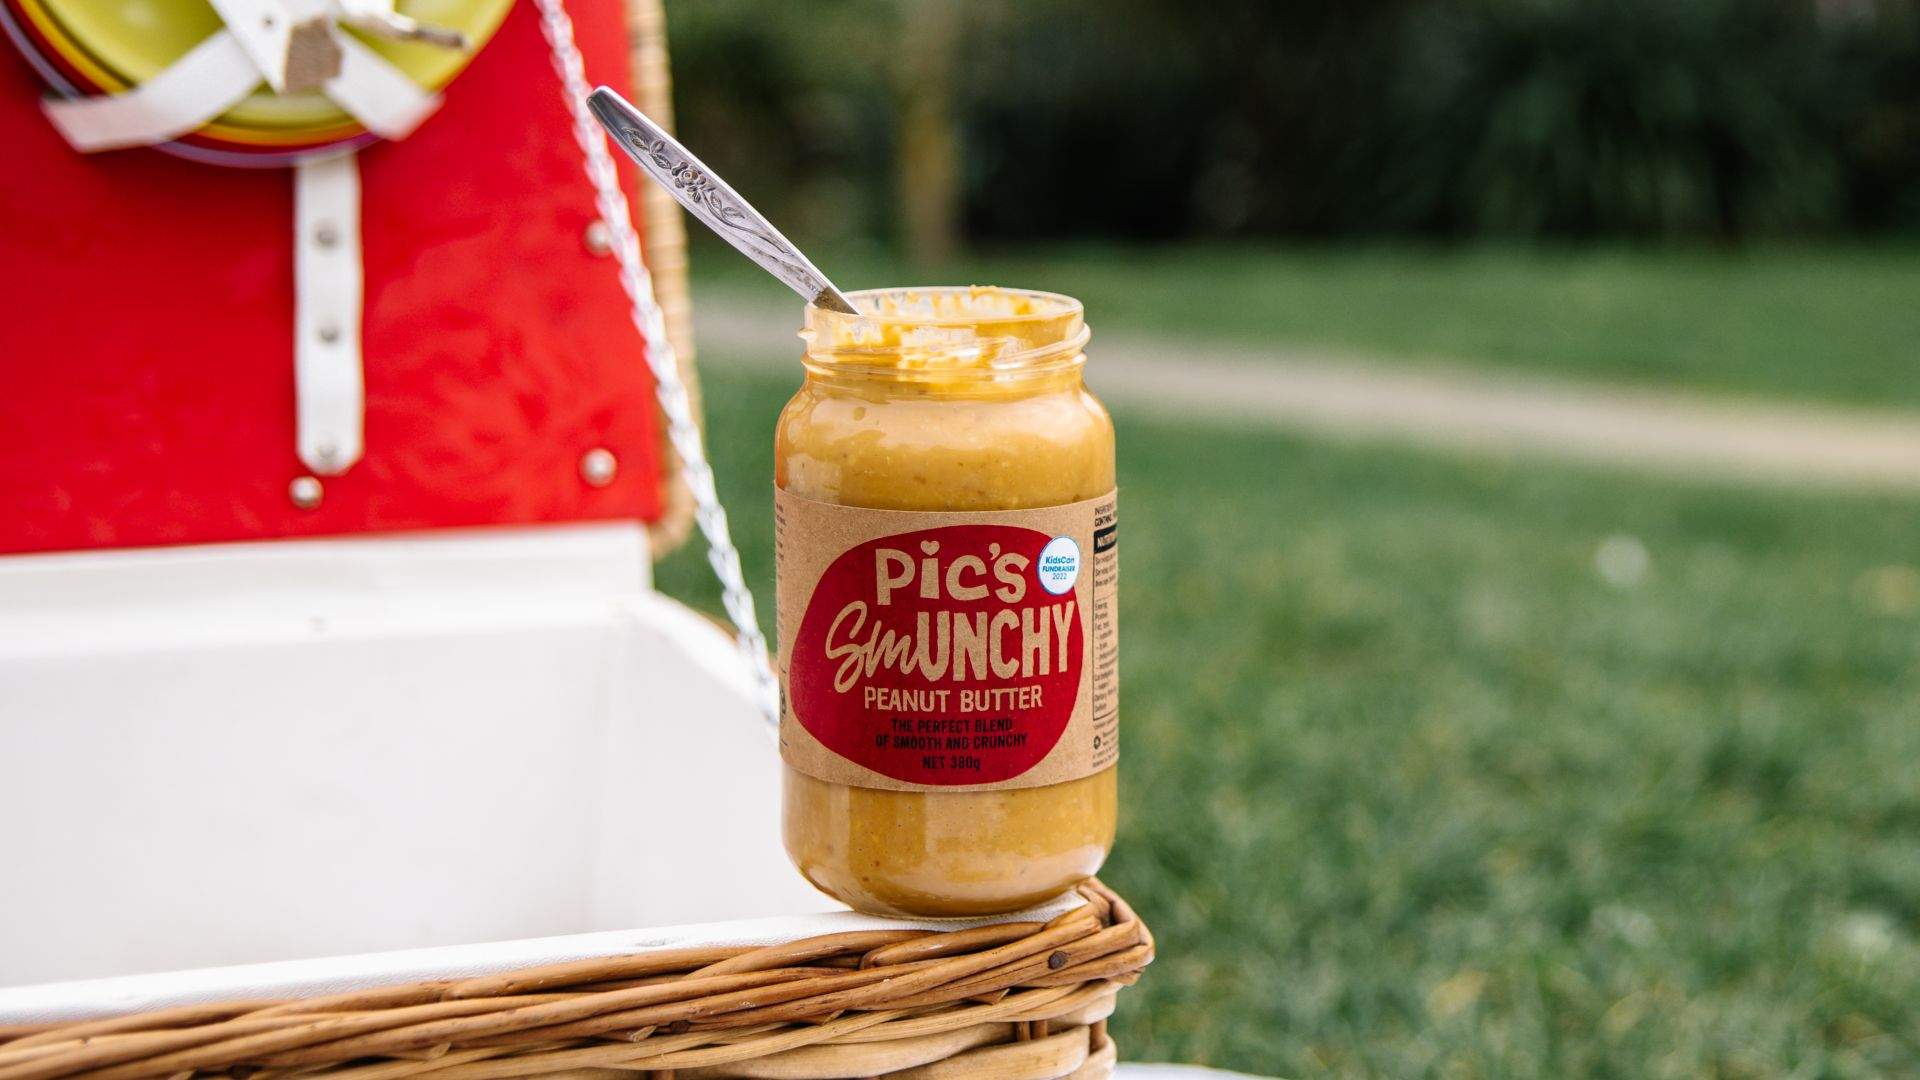 Pics' New Smunchy Peanut Butter Is a Cross Between Smooth and Crunchy to Stop Fights at Home